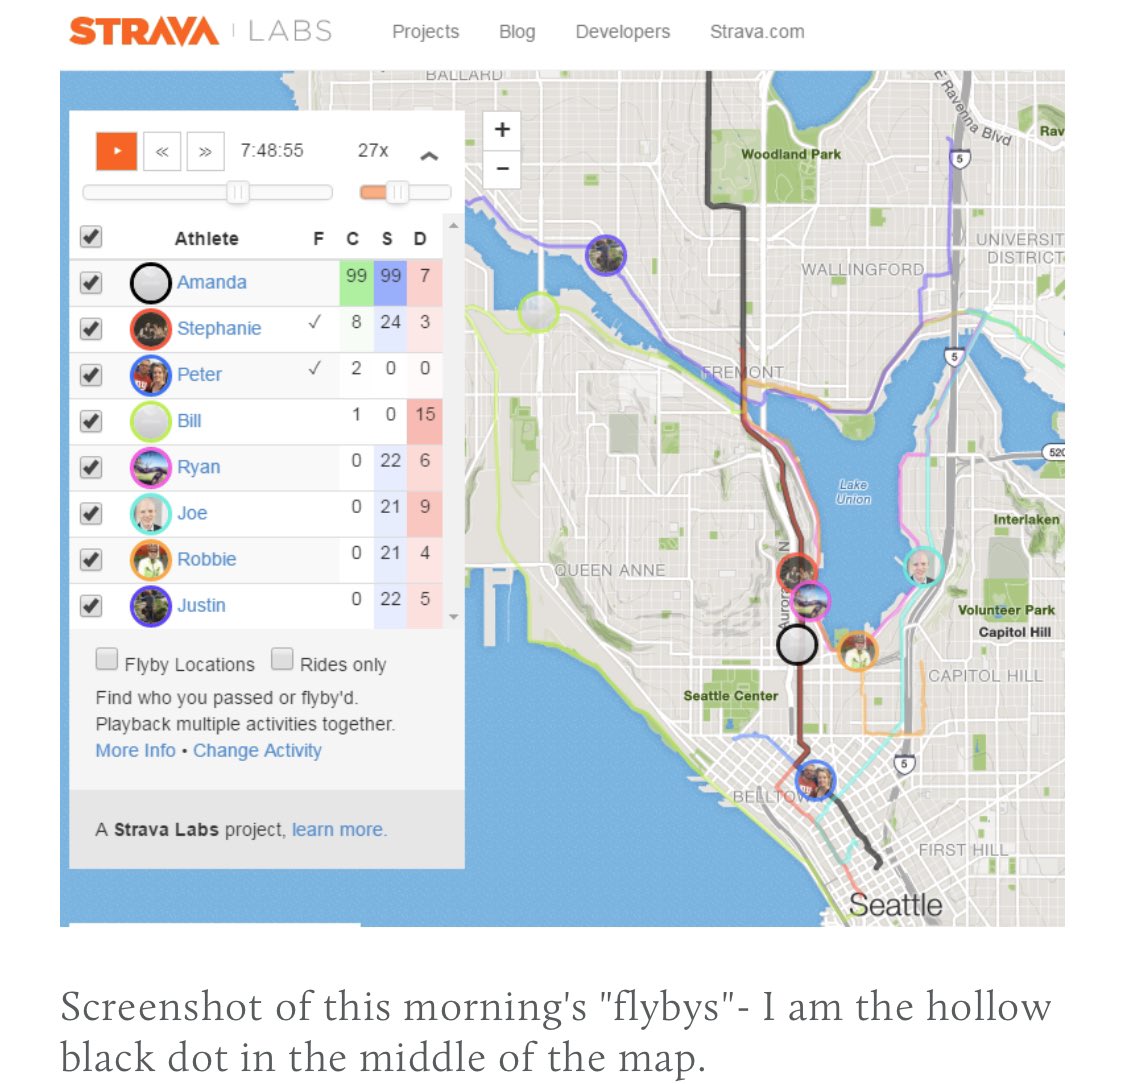 By looking at the data, you could find the borders of (eg) military locations, as well as track routes of employees training to & from their homes. You can clearly see why this is a security issue! Also, Strava's “FlyBy” feature shows who you’ve passed on a ride or a run.